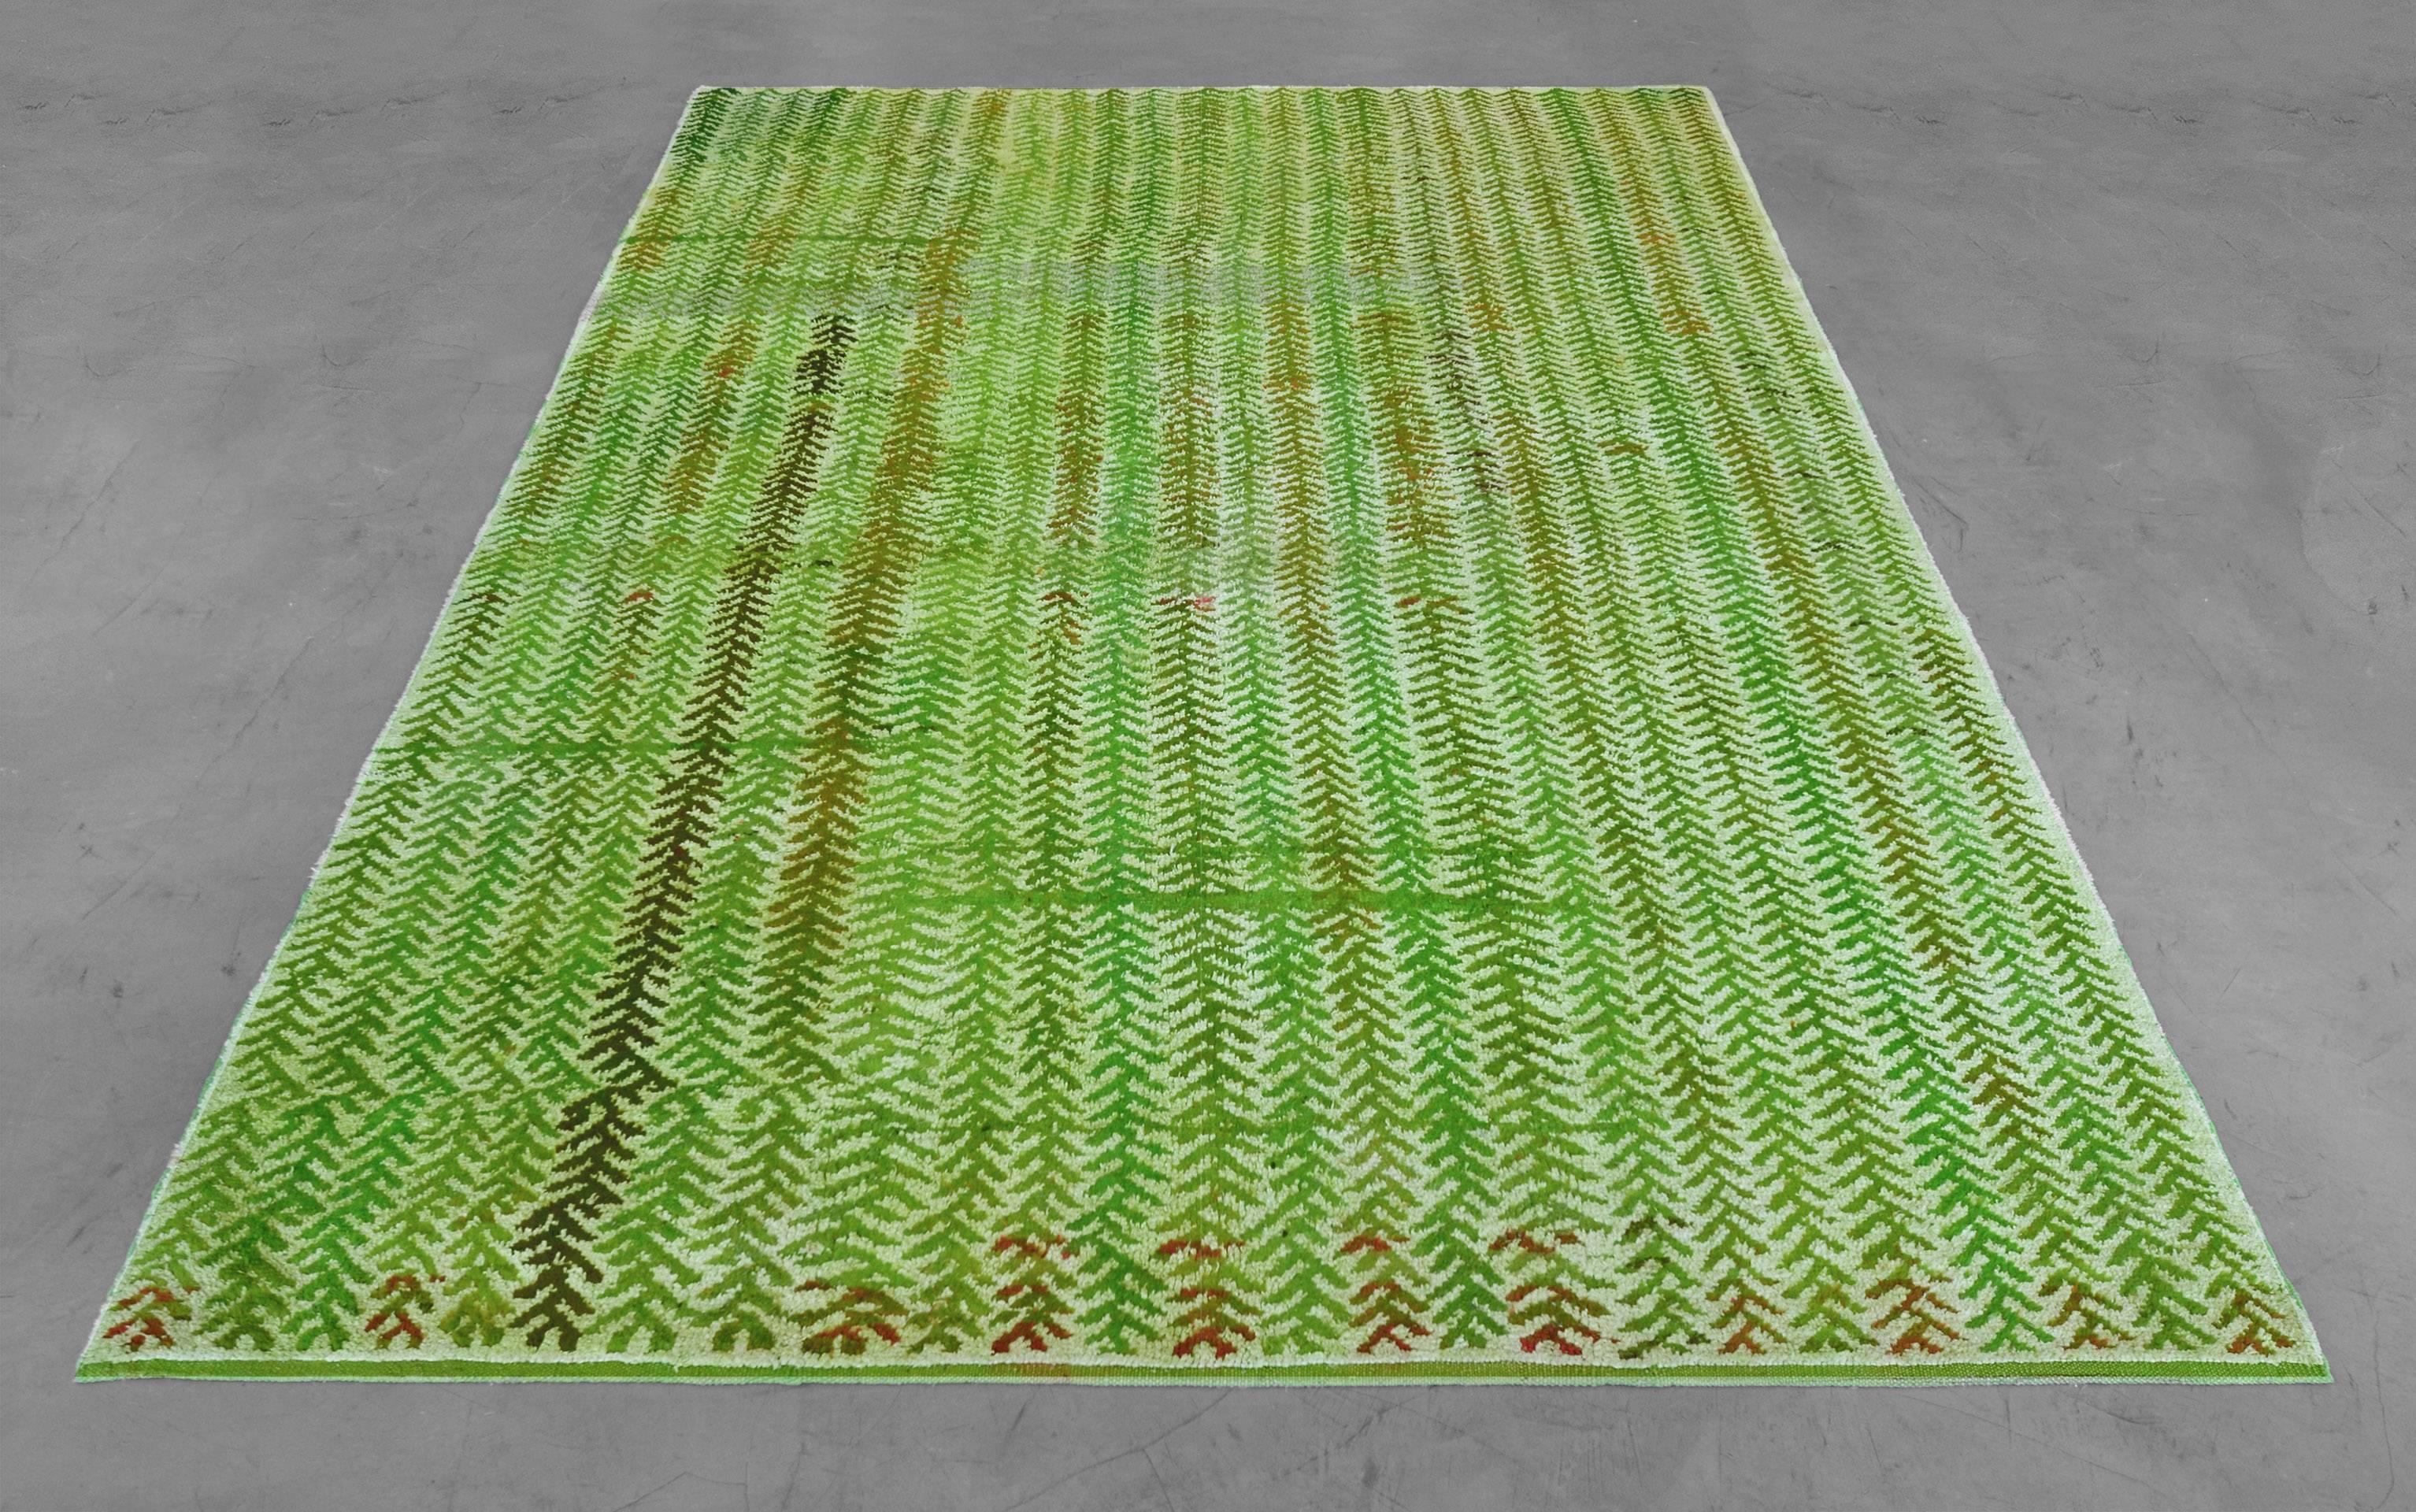 Vintage silk and hemp rug from the late 20th century, hand-knotted in Turkey. This 6’7 x 9’3 rug has brilliant color and unmatched texture with its bright green background with a tonal organic striped motif and juxtaposition of lush soft silk and